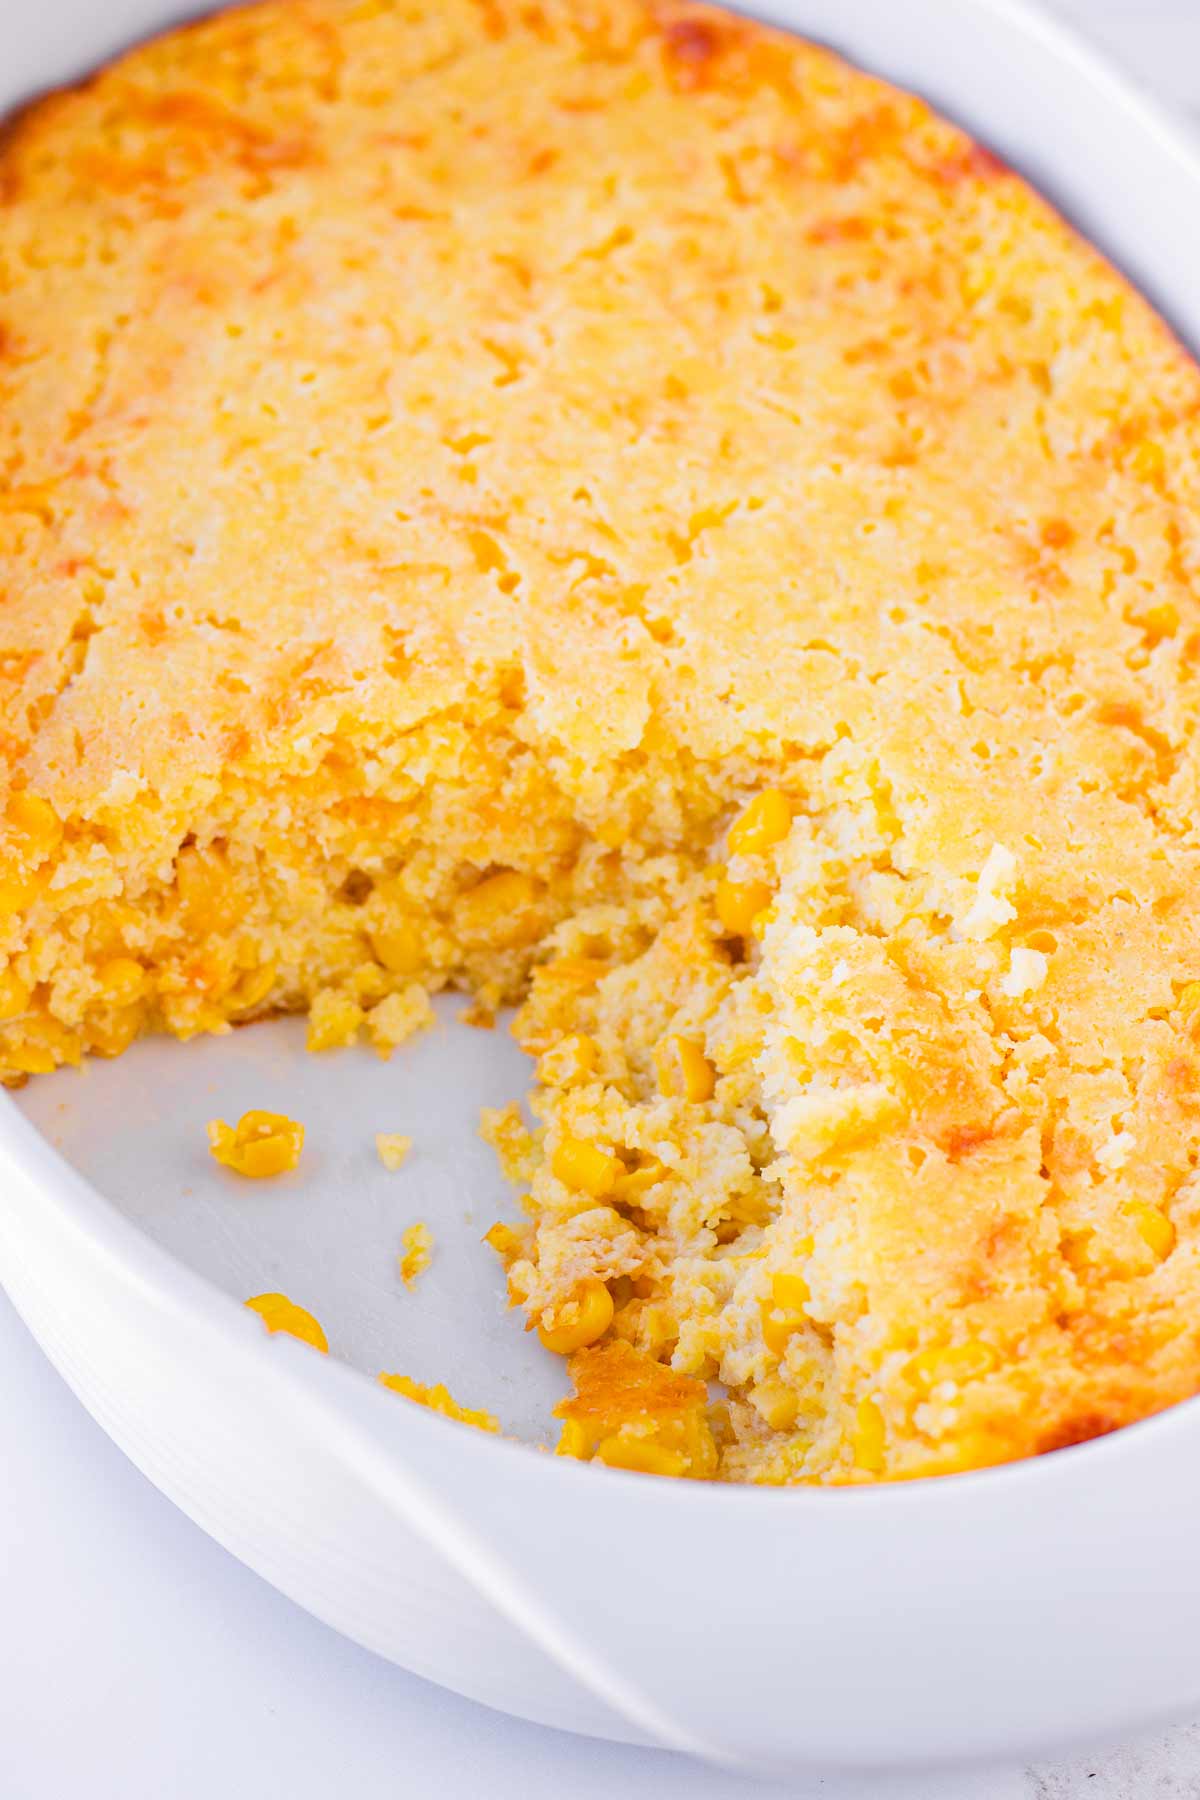 the interior of a baked corn pudding